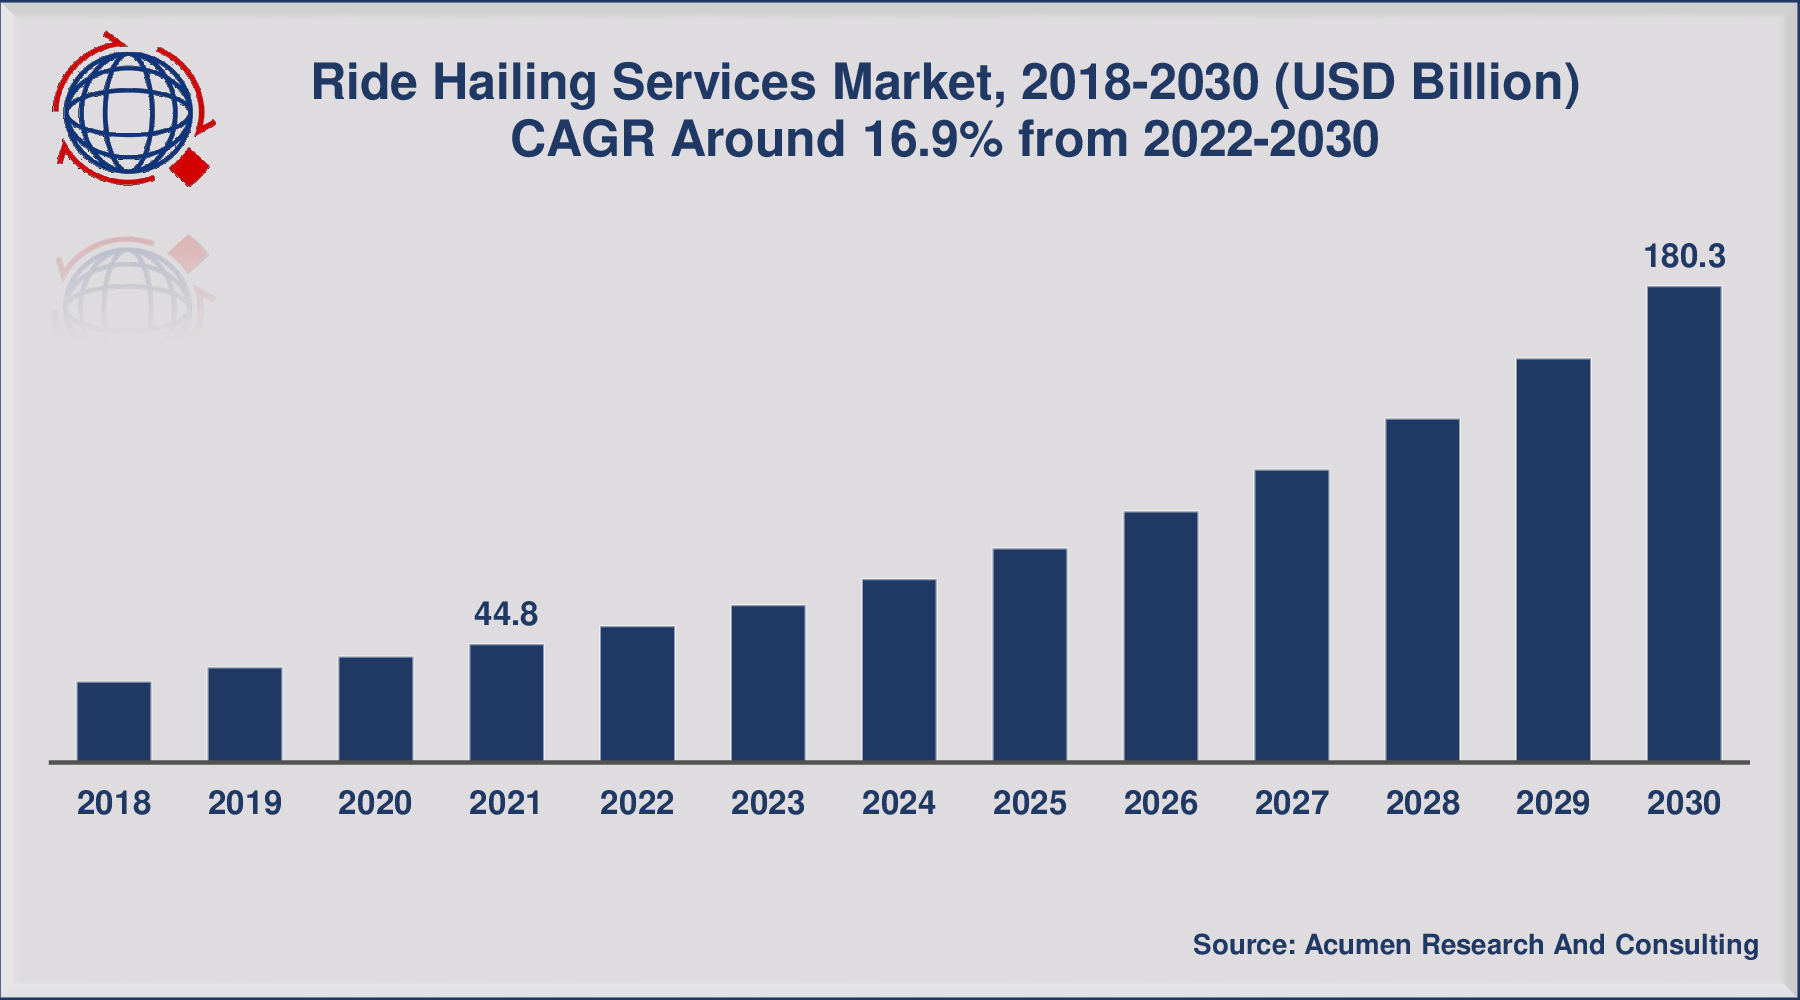 Ride Hailing Services Market Size Is Expected To Reach At Usd 1803